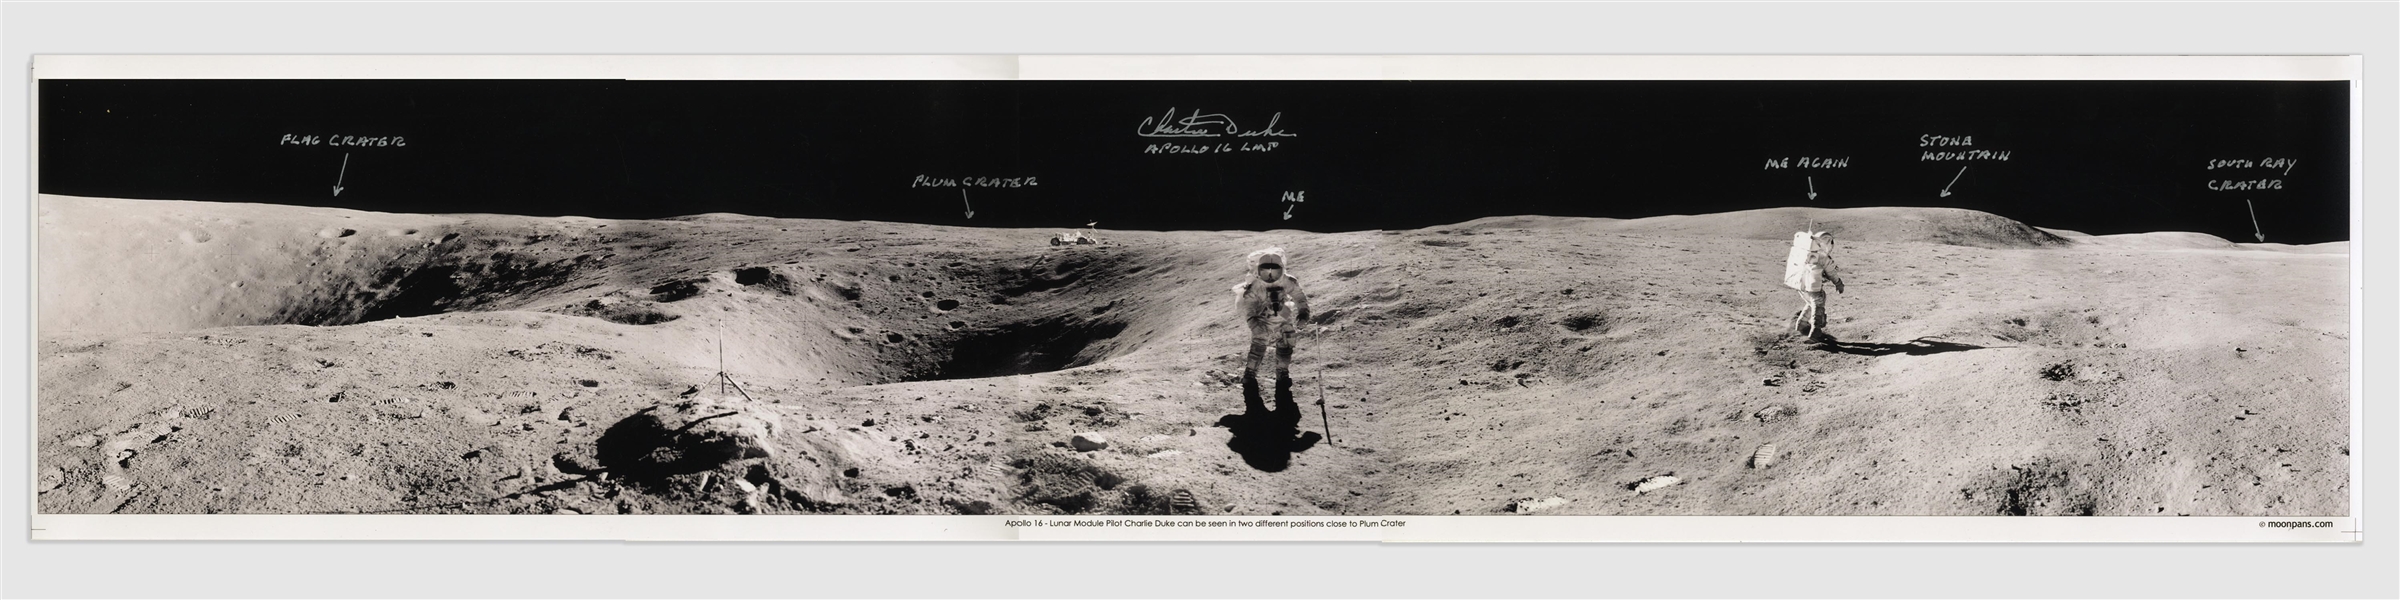 Charlie Duke Signed 40'' Panoramic Photo of the Lunar Surface During the Apollo 16 Mission